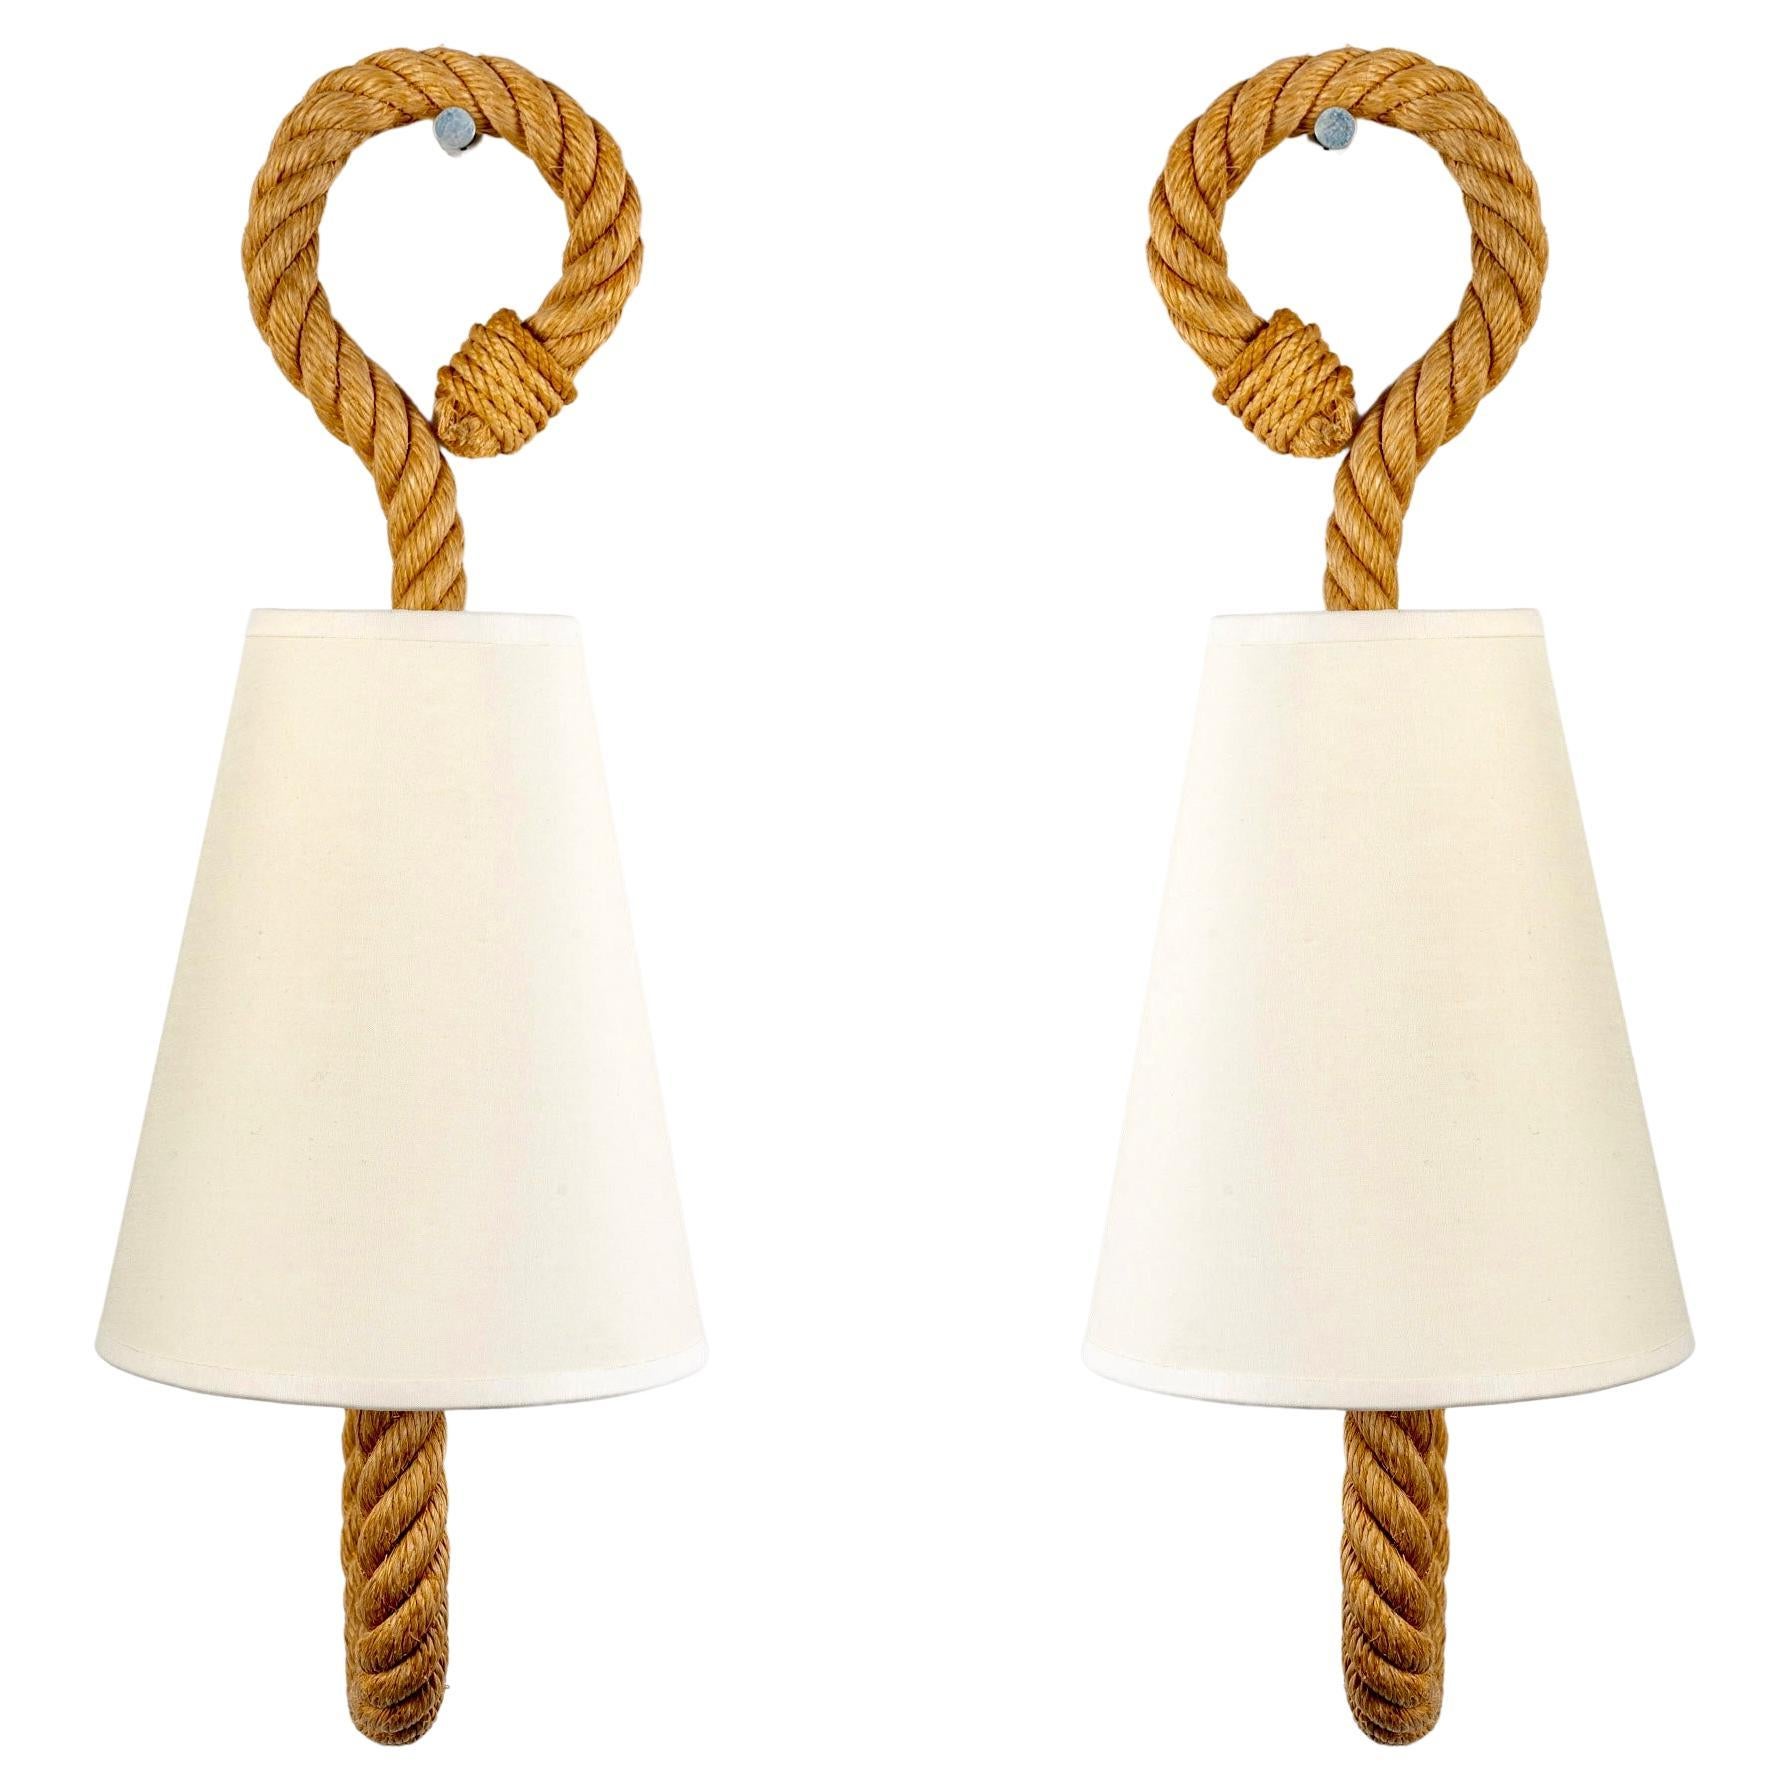 1950 Pair of wall lamps by Adrien Audoux & Frida Minet